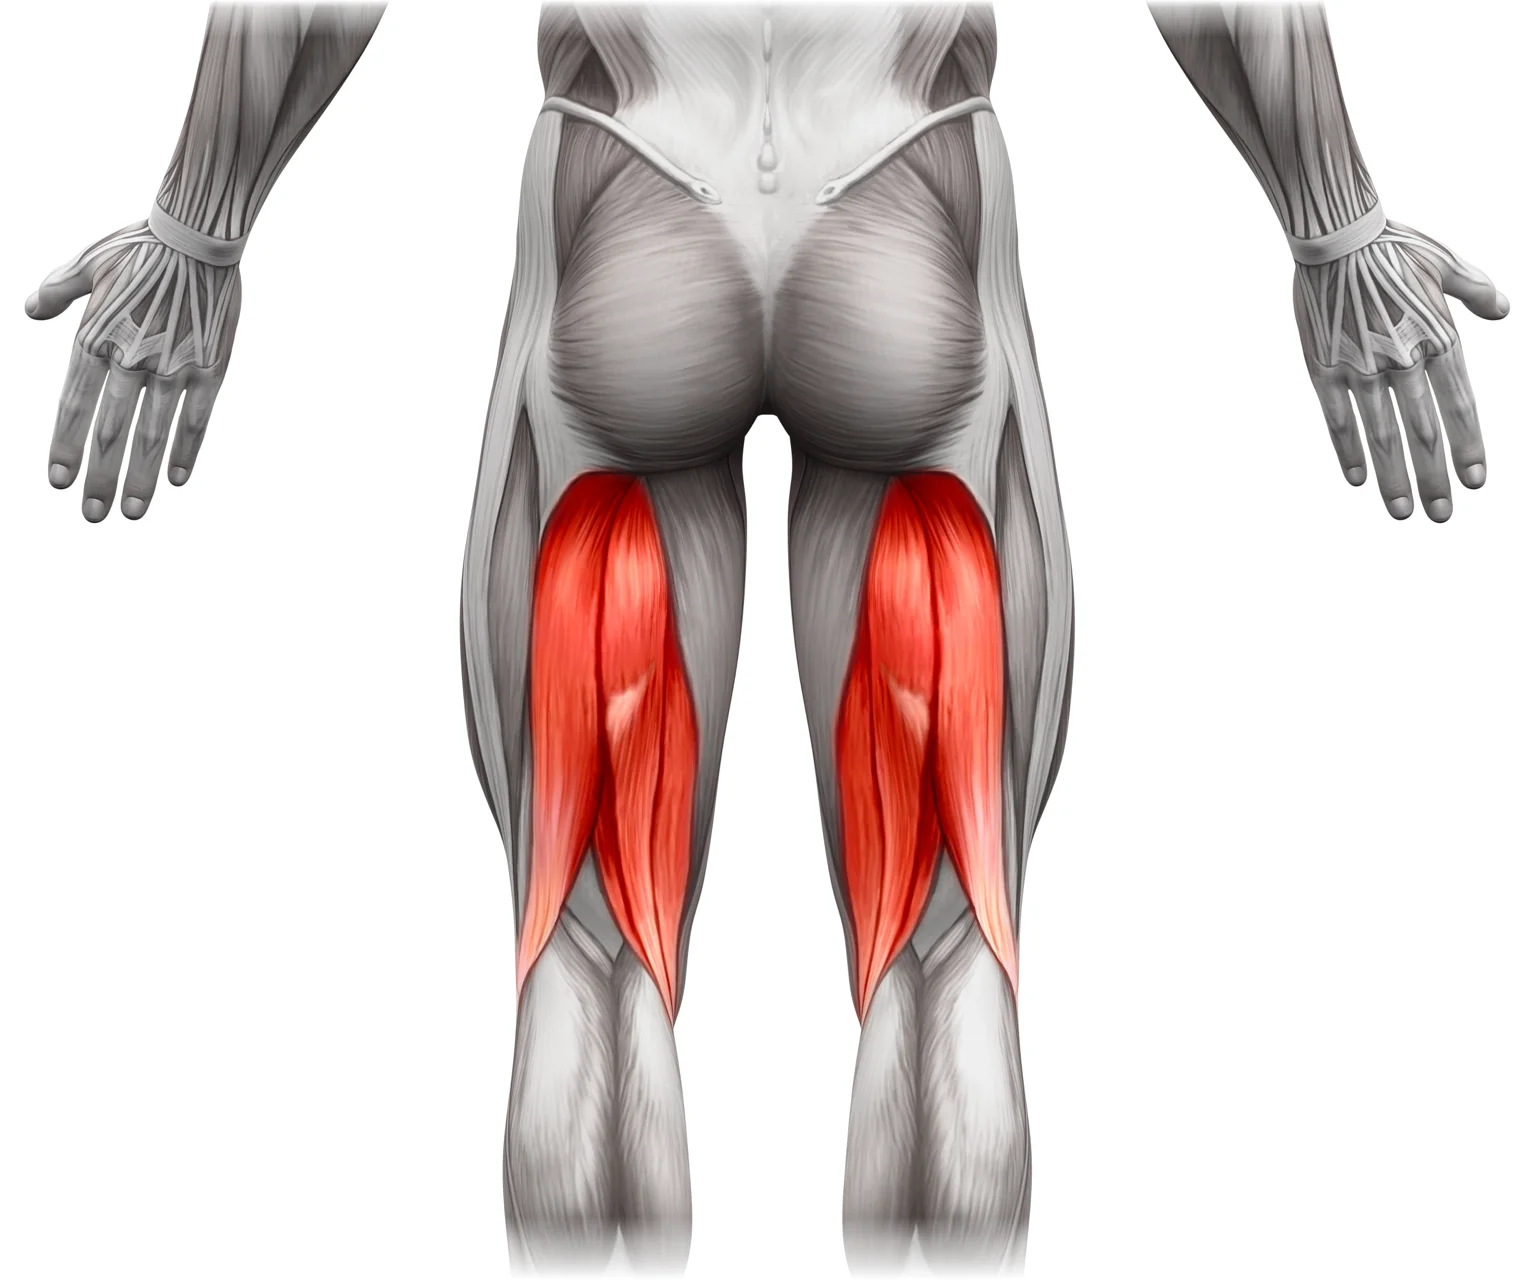 diagram - View from the rear of the legs, showing location of the hamstrings.